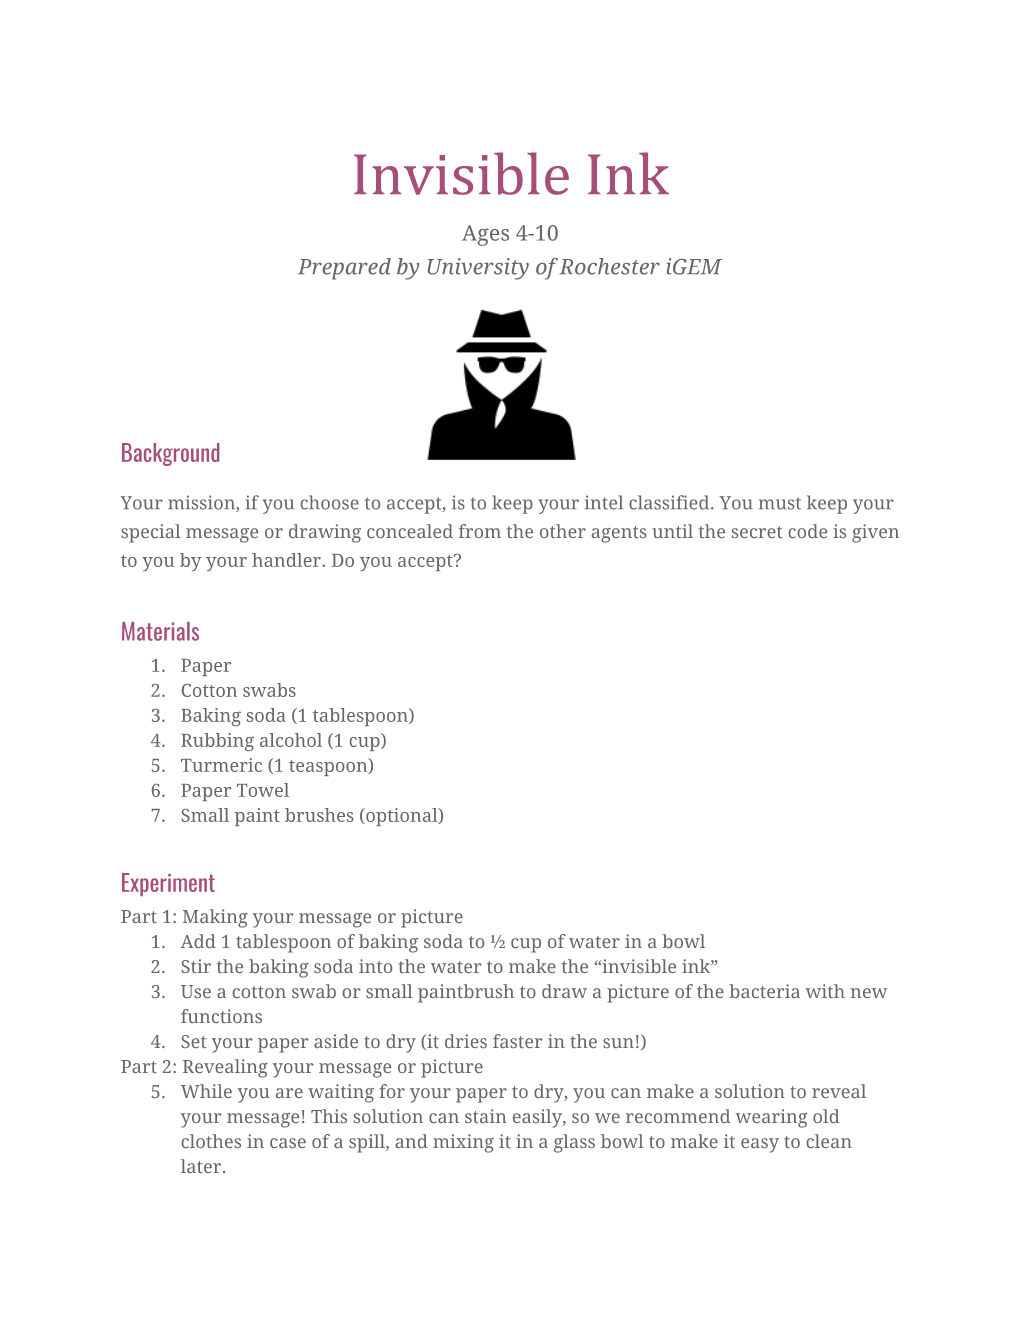 Invisible Ink Ages 4-10 Prepared by University of Rochester Igem